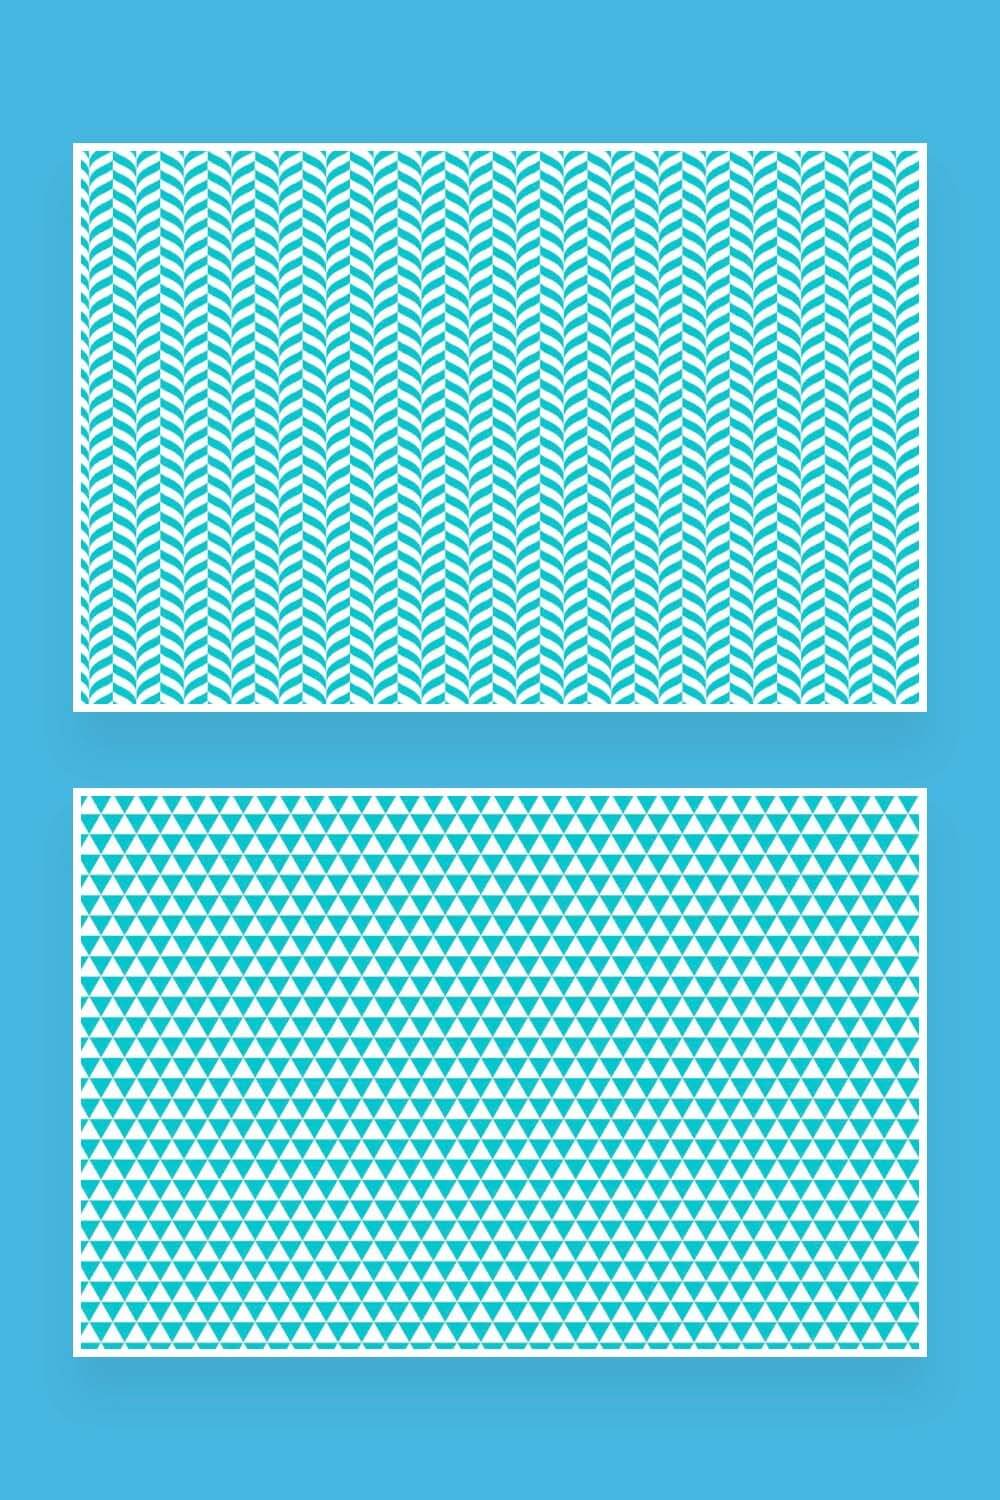 Two pictures with modern seamless patterns, triangles, arrows.